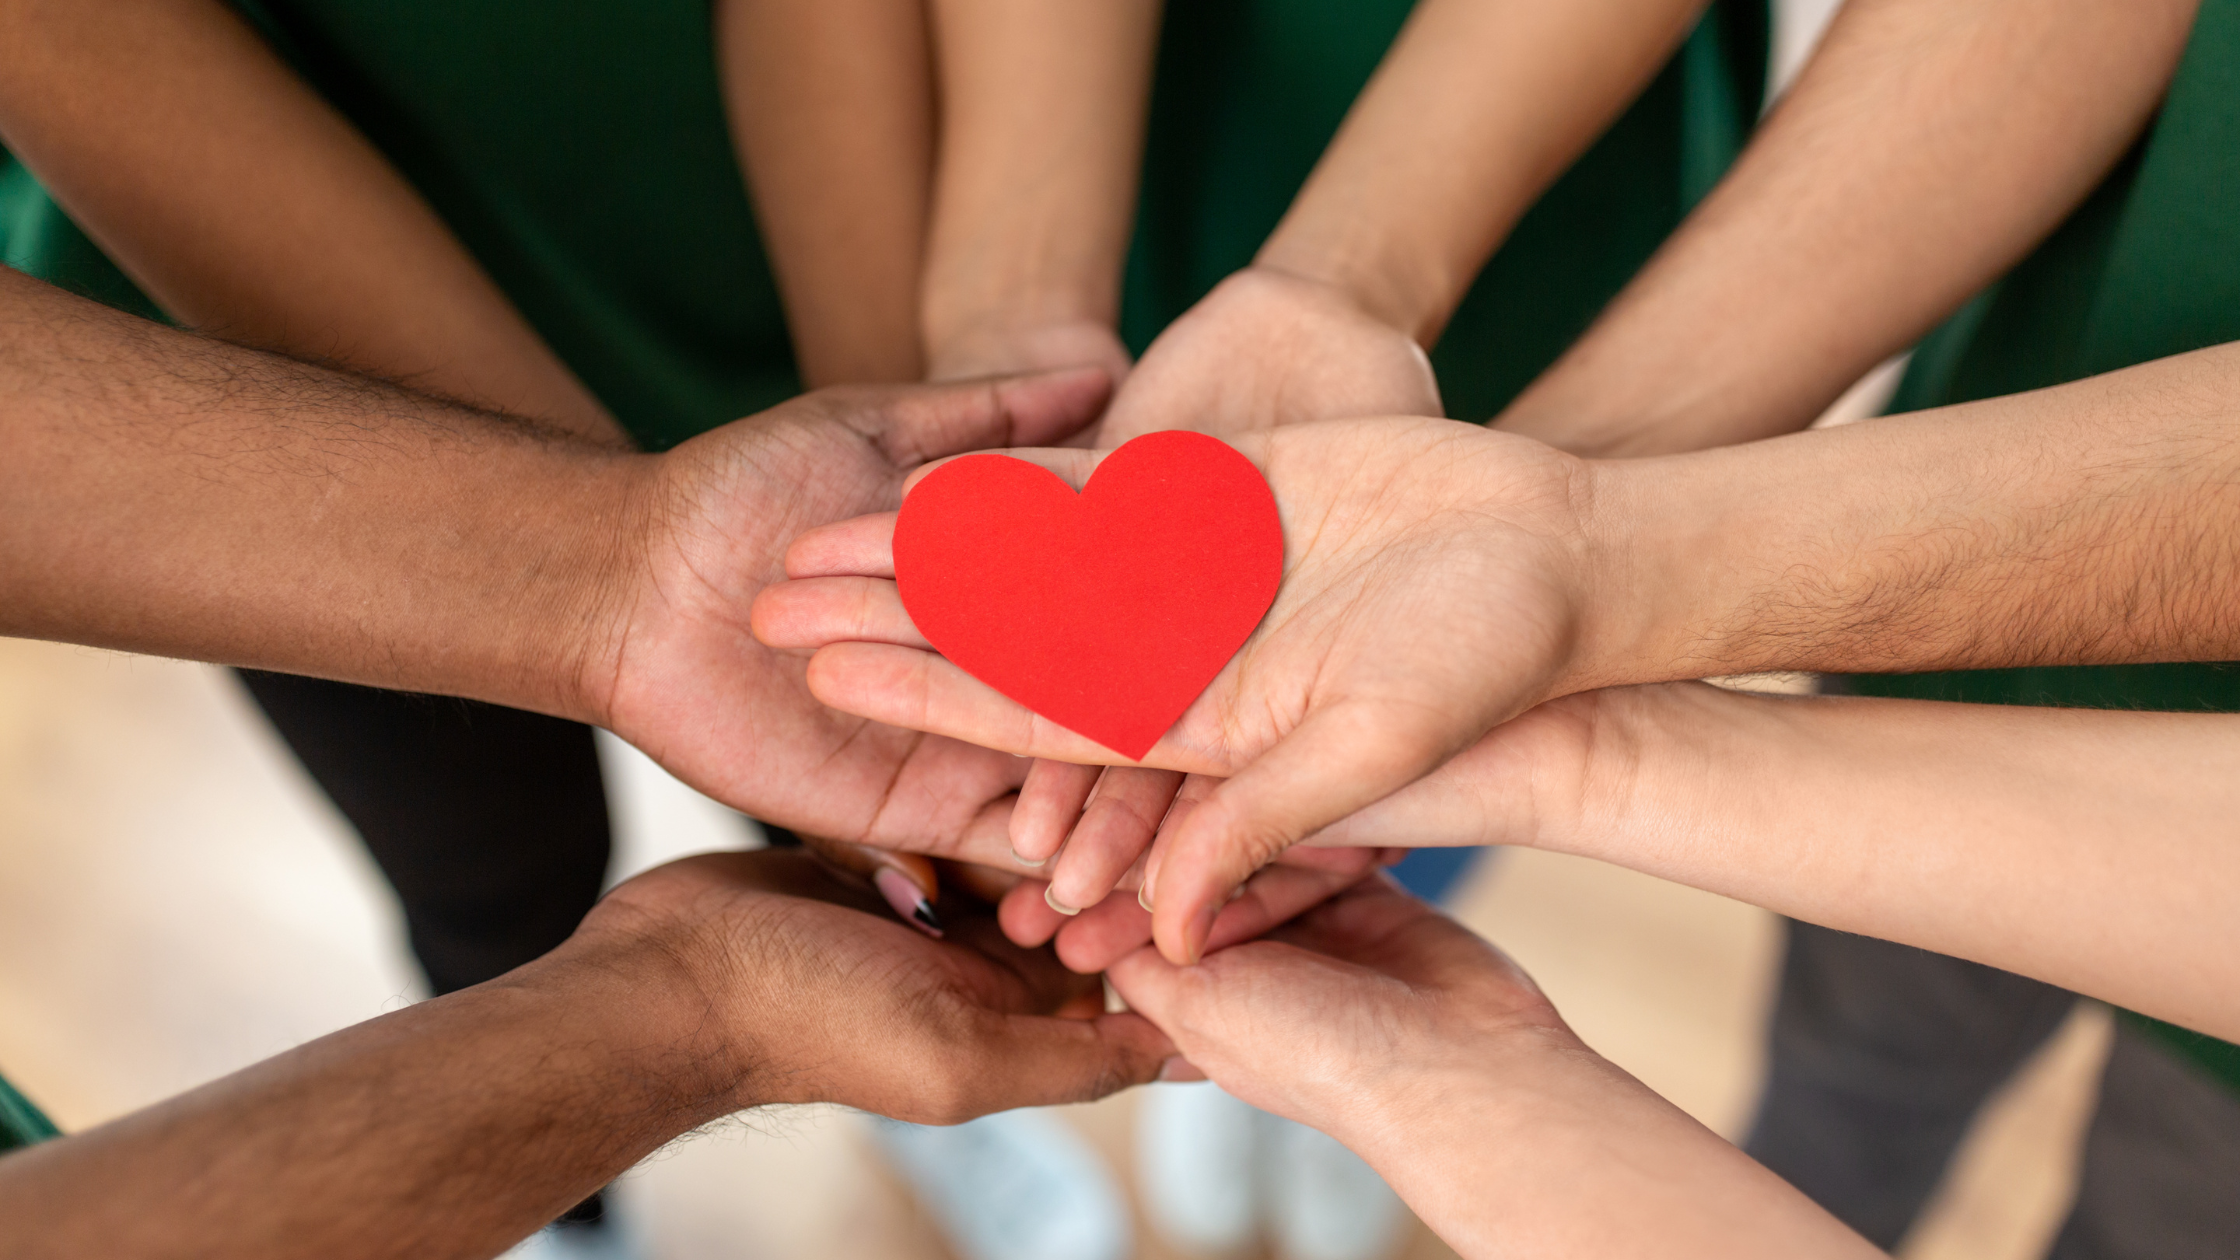 A group of hands holding a red heart, representing the compassion and support shown by nonprofits.